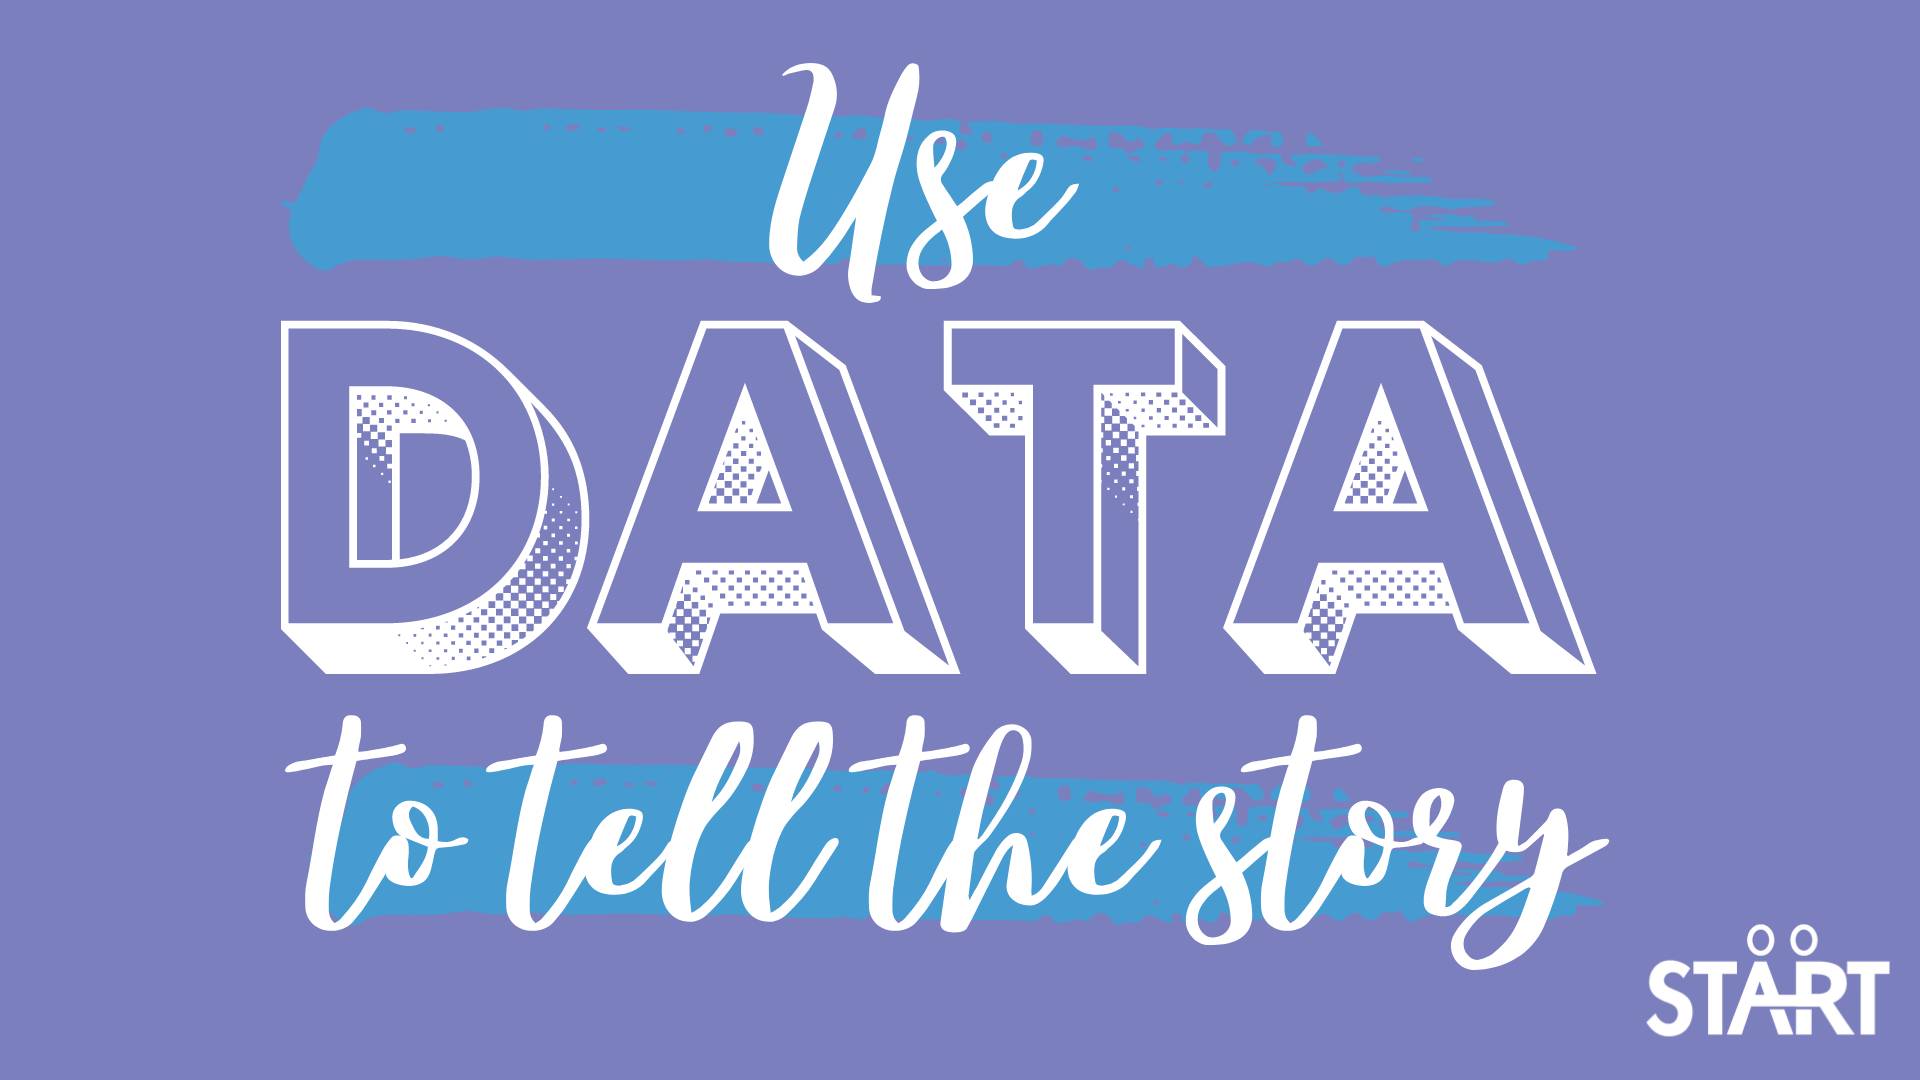 Use data to tell the story